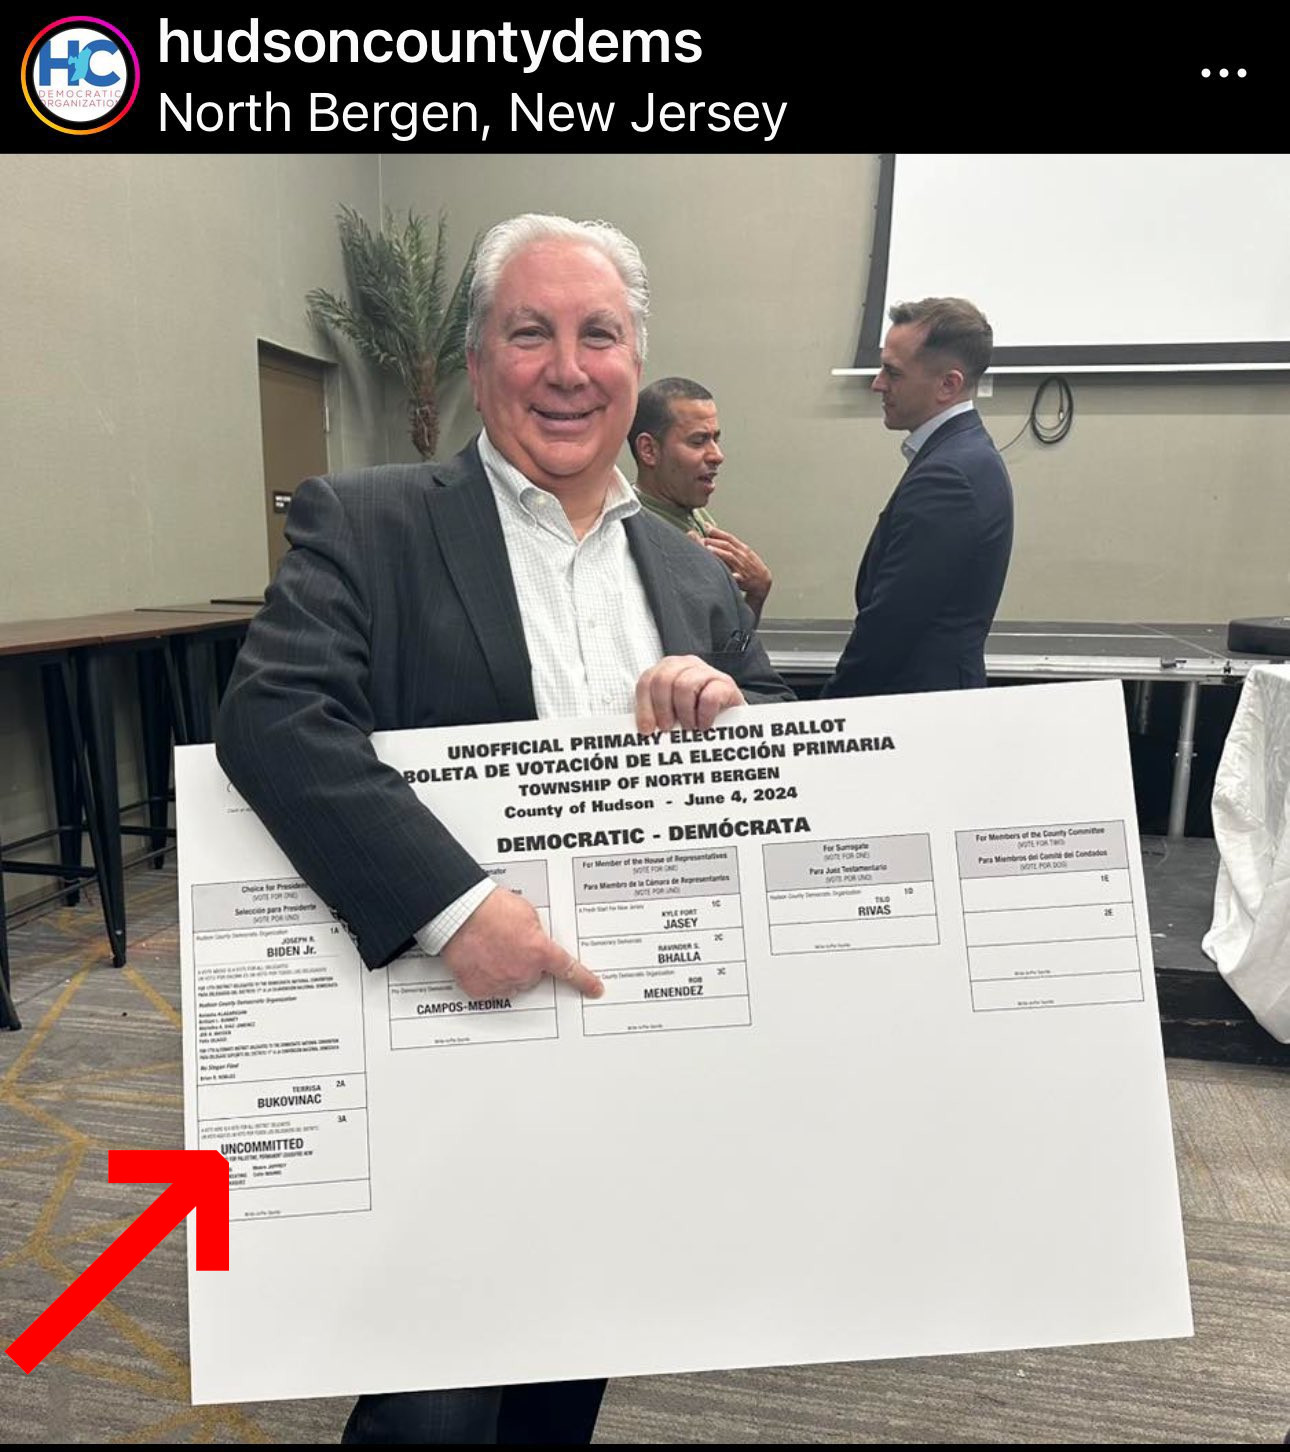 Image of Hudson County Dems on Instagram. The Hudson County Democratic
Organization Chair Anthony Vainieri, a short white man with a receding hairline
is wearing a suit and holding a large white poster which is the ballot mock-up
for Hudson County, with a finger pointing at a candidate. A Red Arrow is
pointing to Uncommitted.